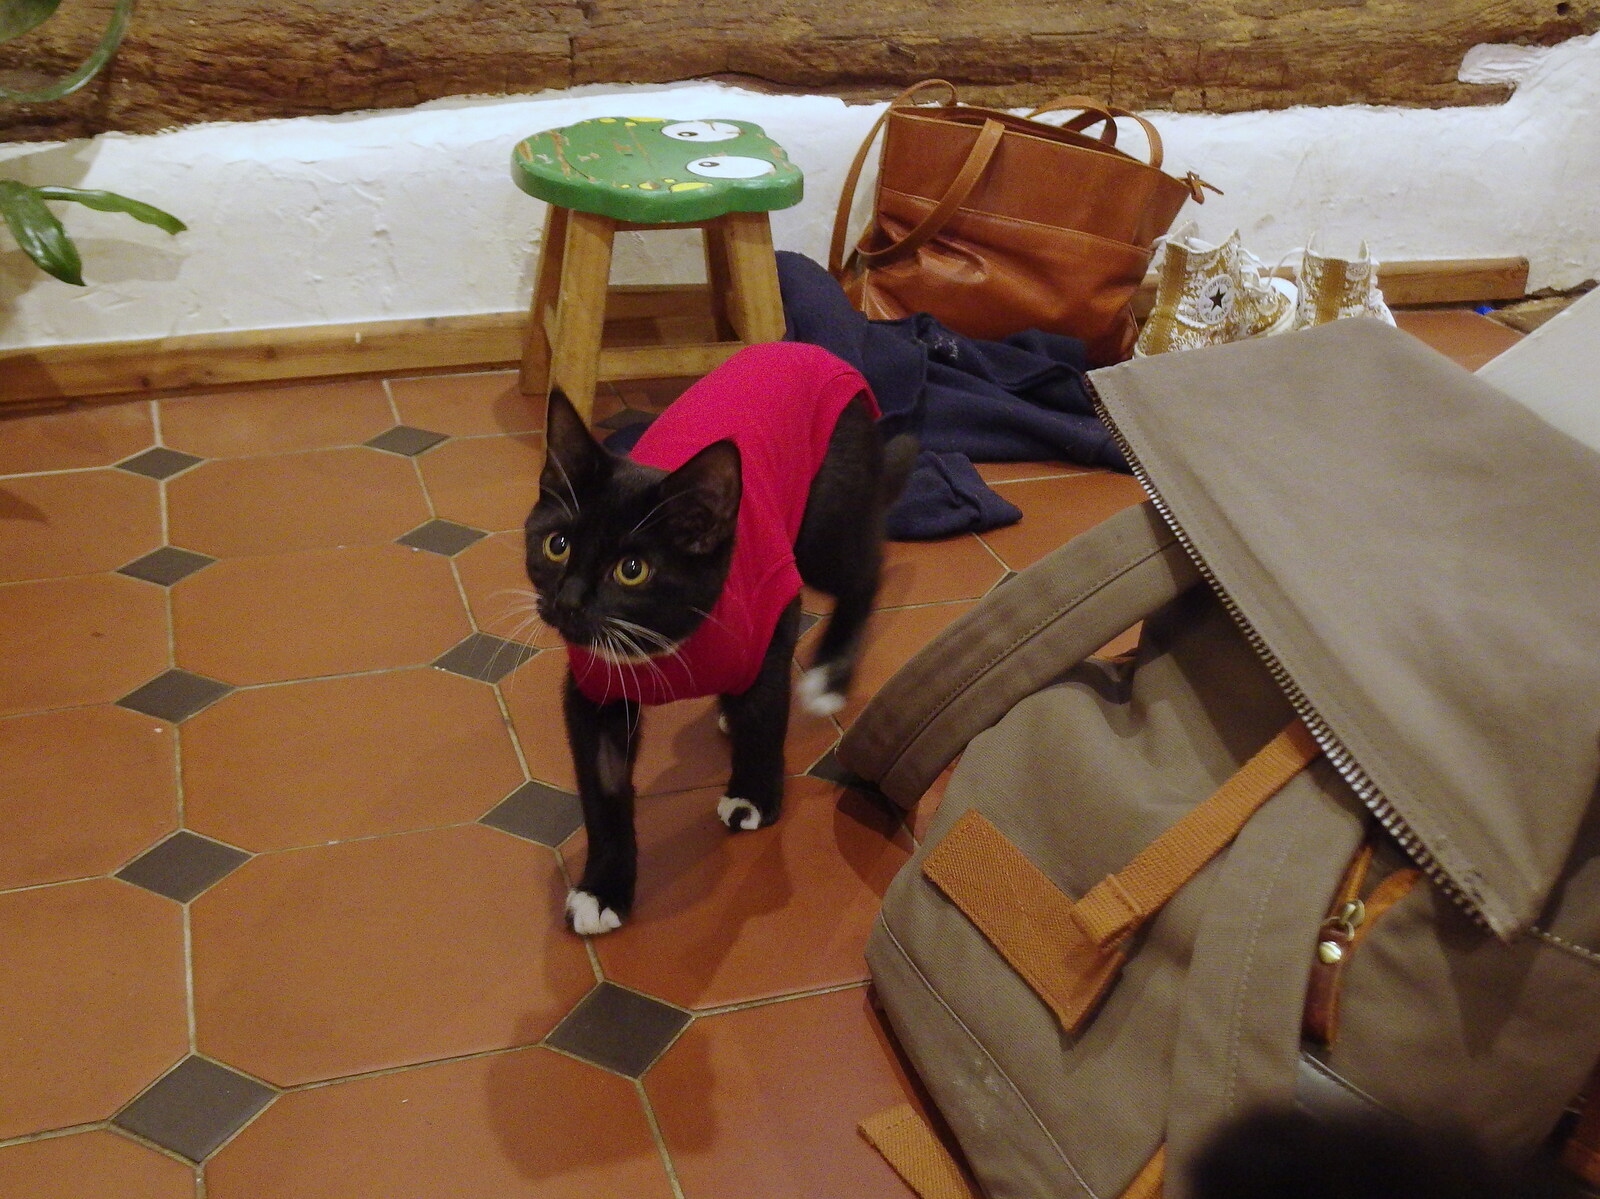 Molly - Lunatic Kitten B - has pyjamas on from Sunday Lunch at the Village Hall, Brome, Suffolk - 10th October 2021